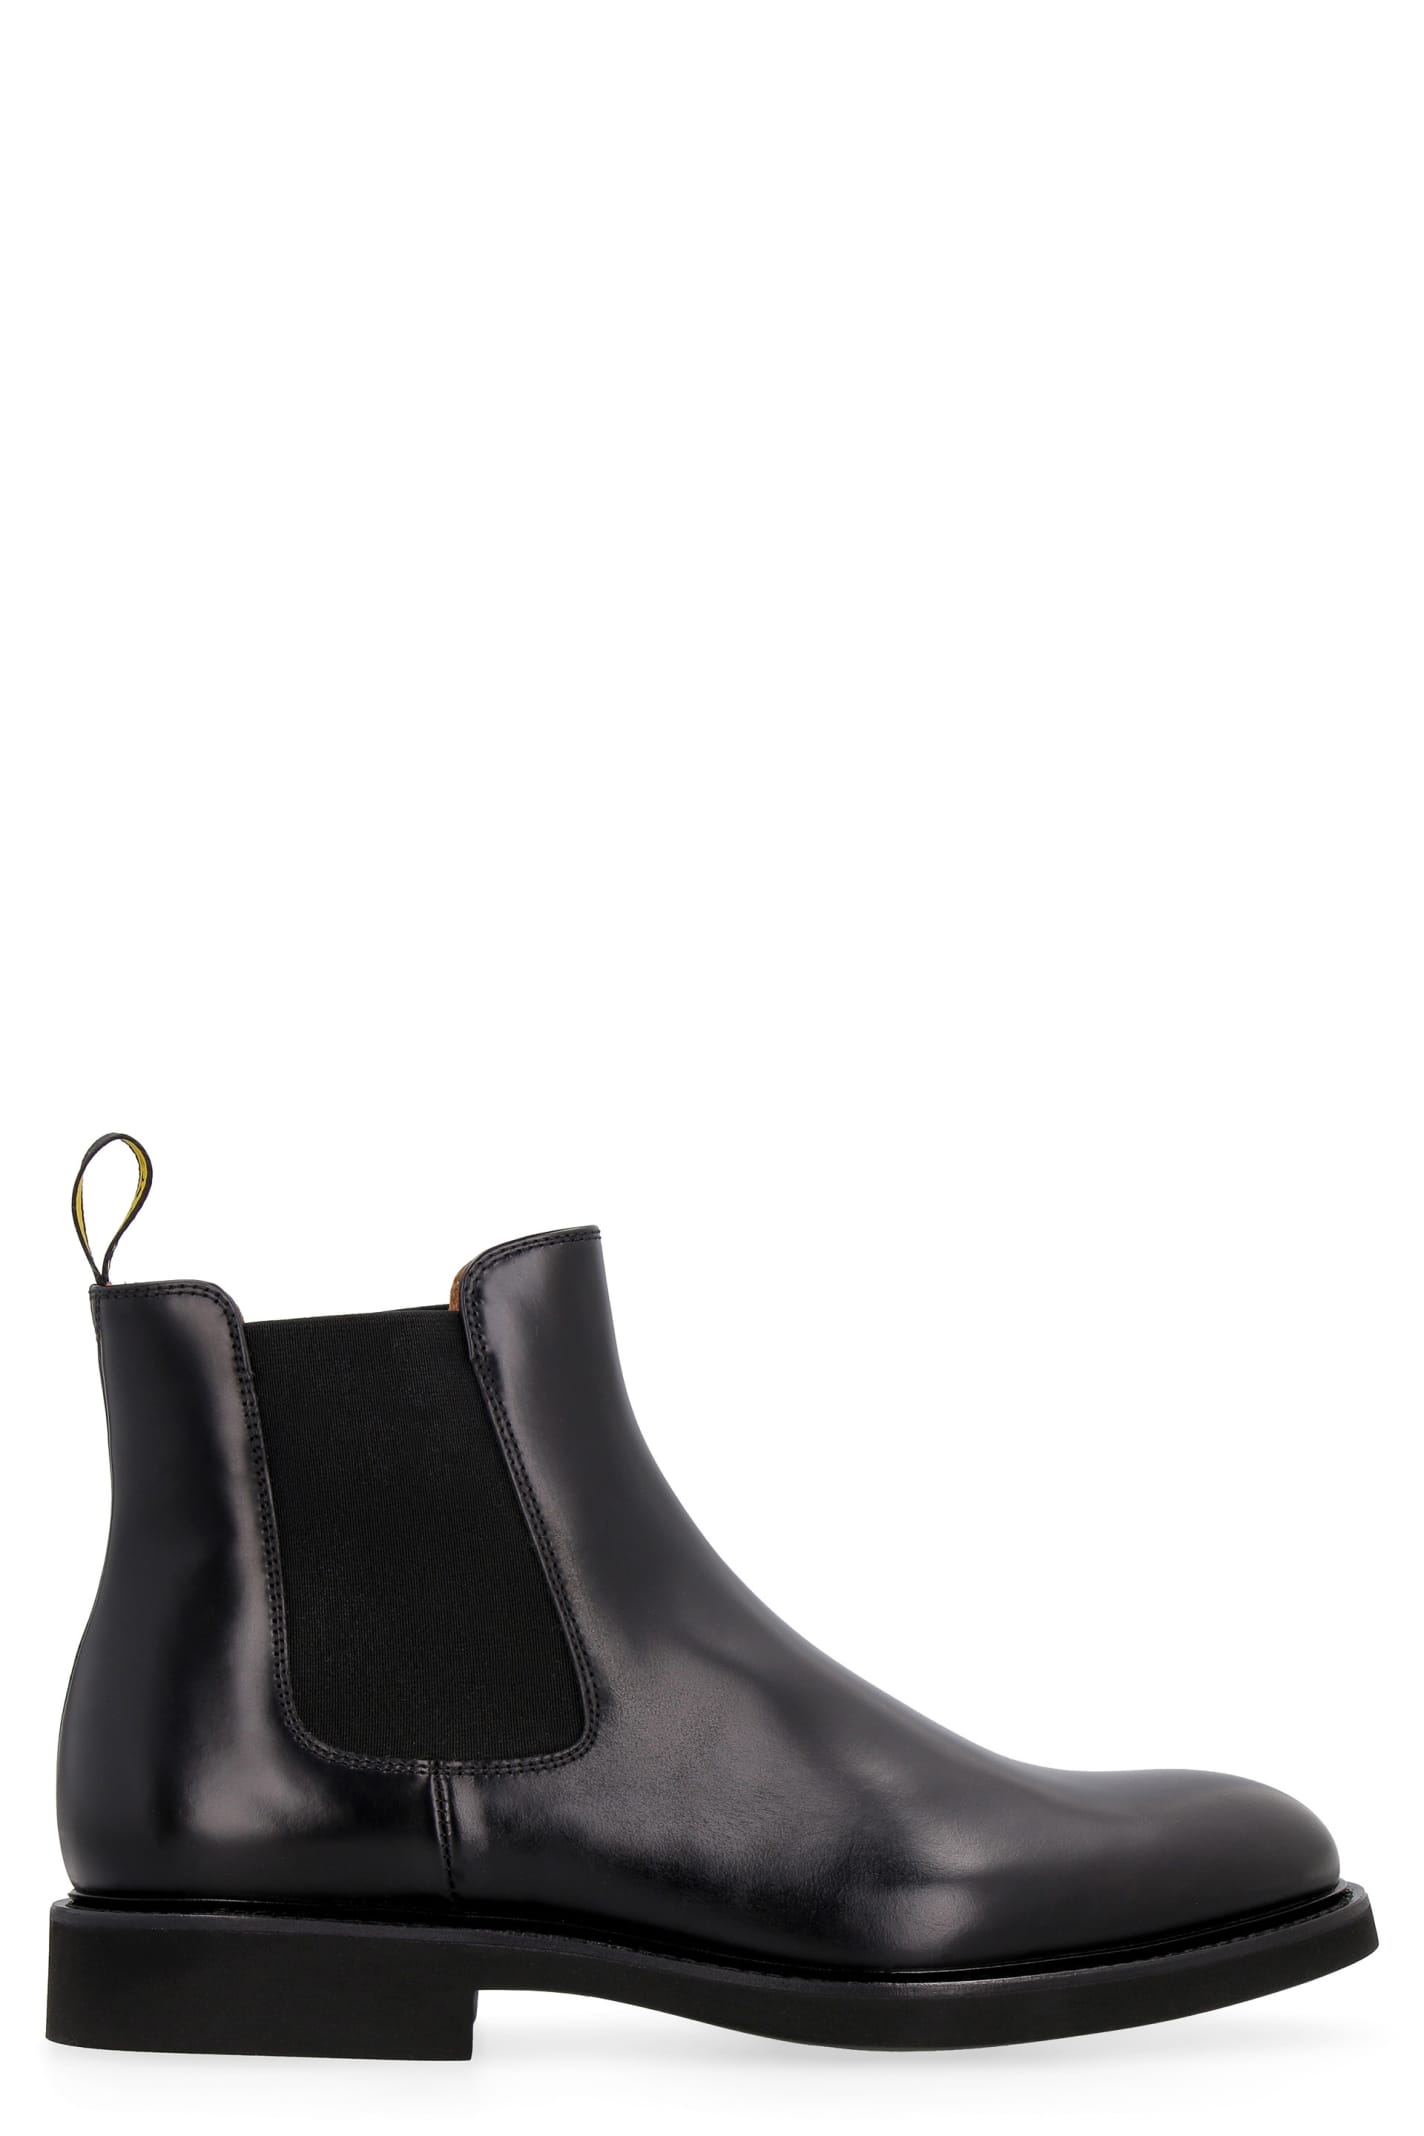 Doucals Leather Chelsea-boots